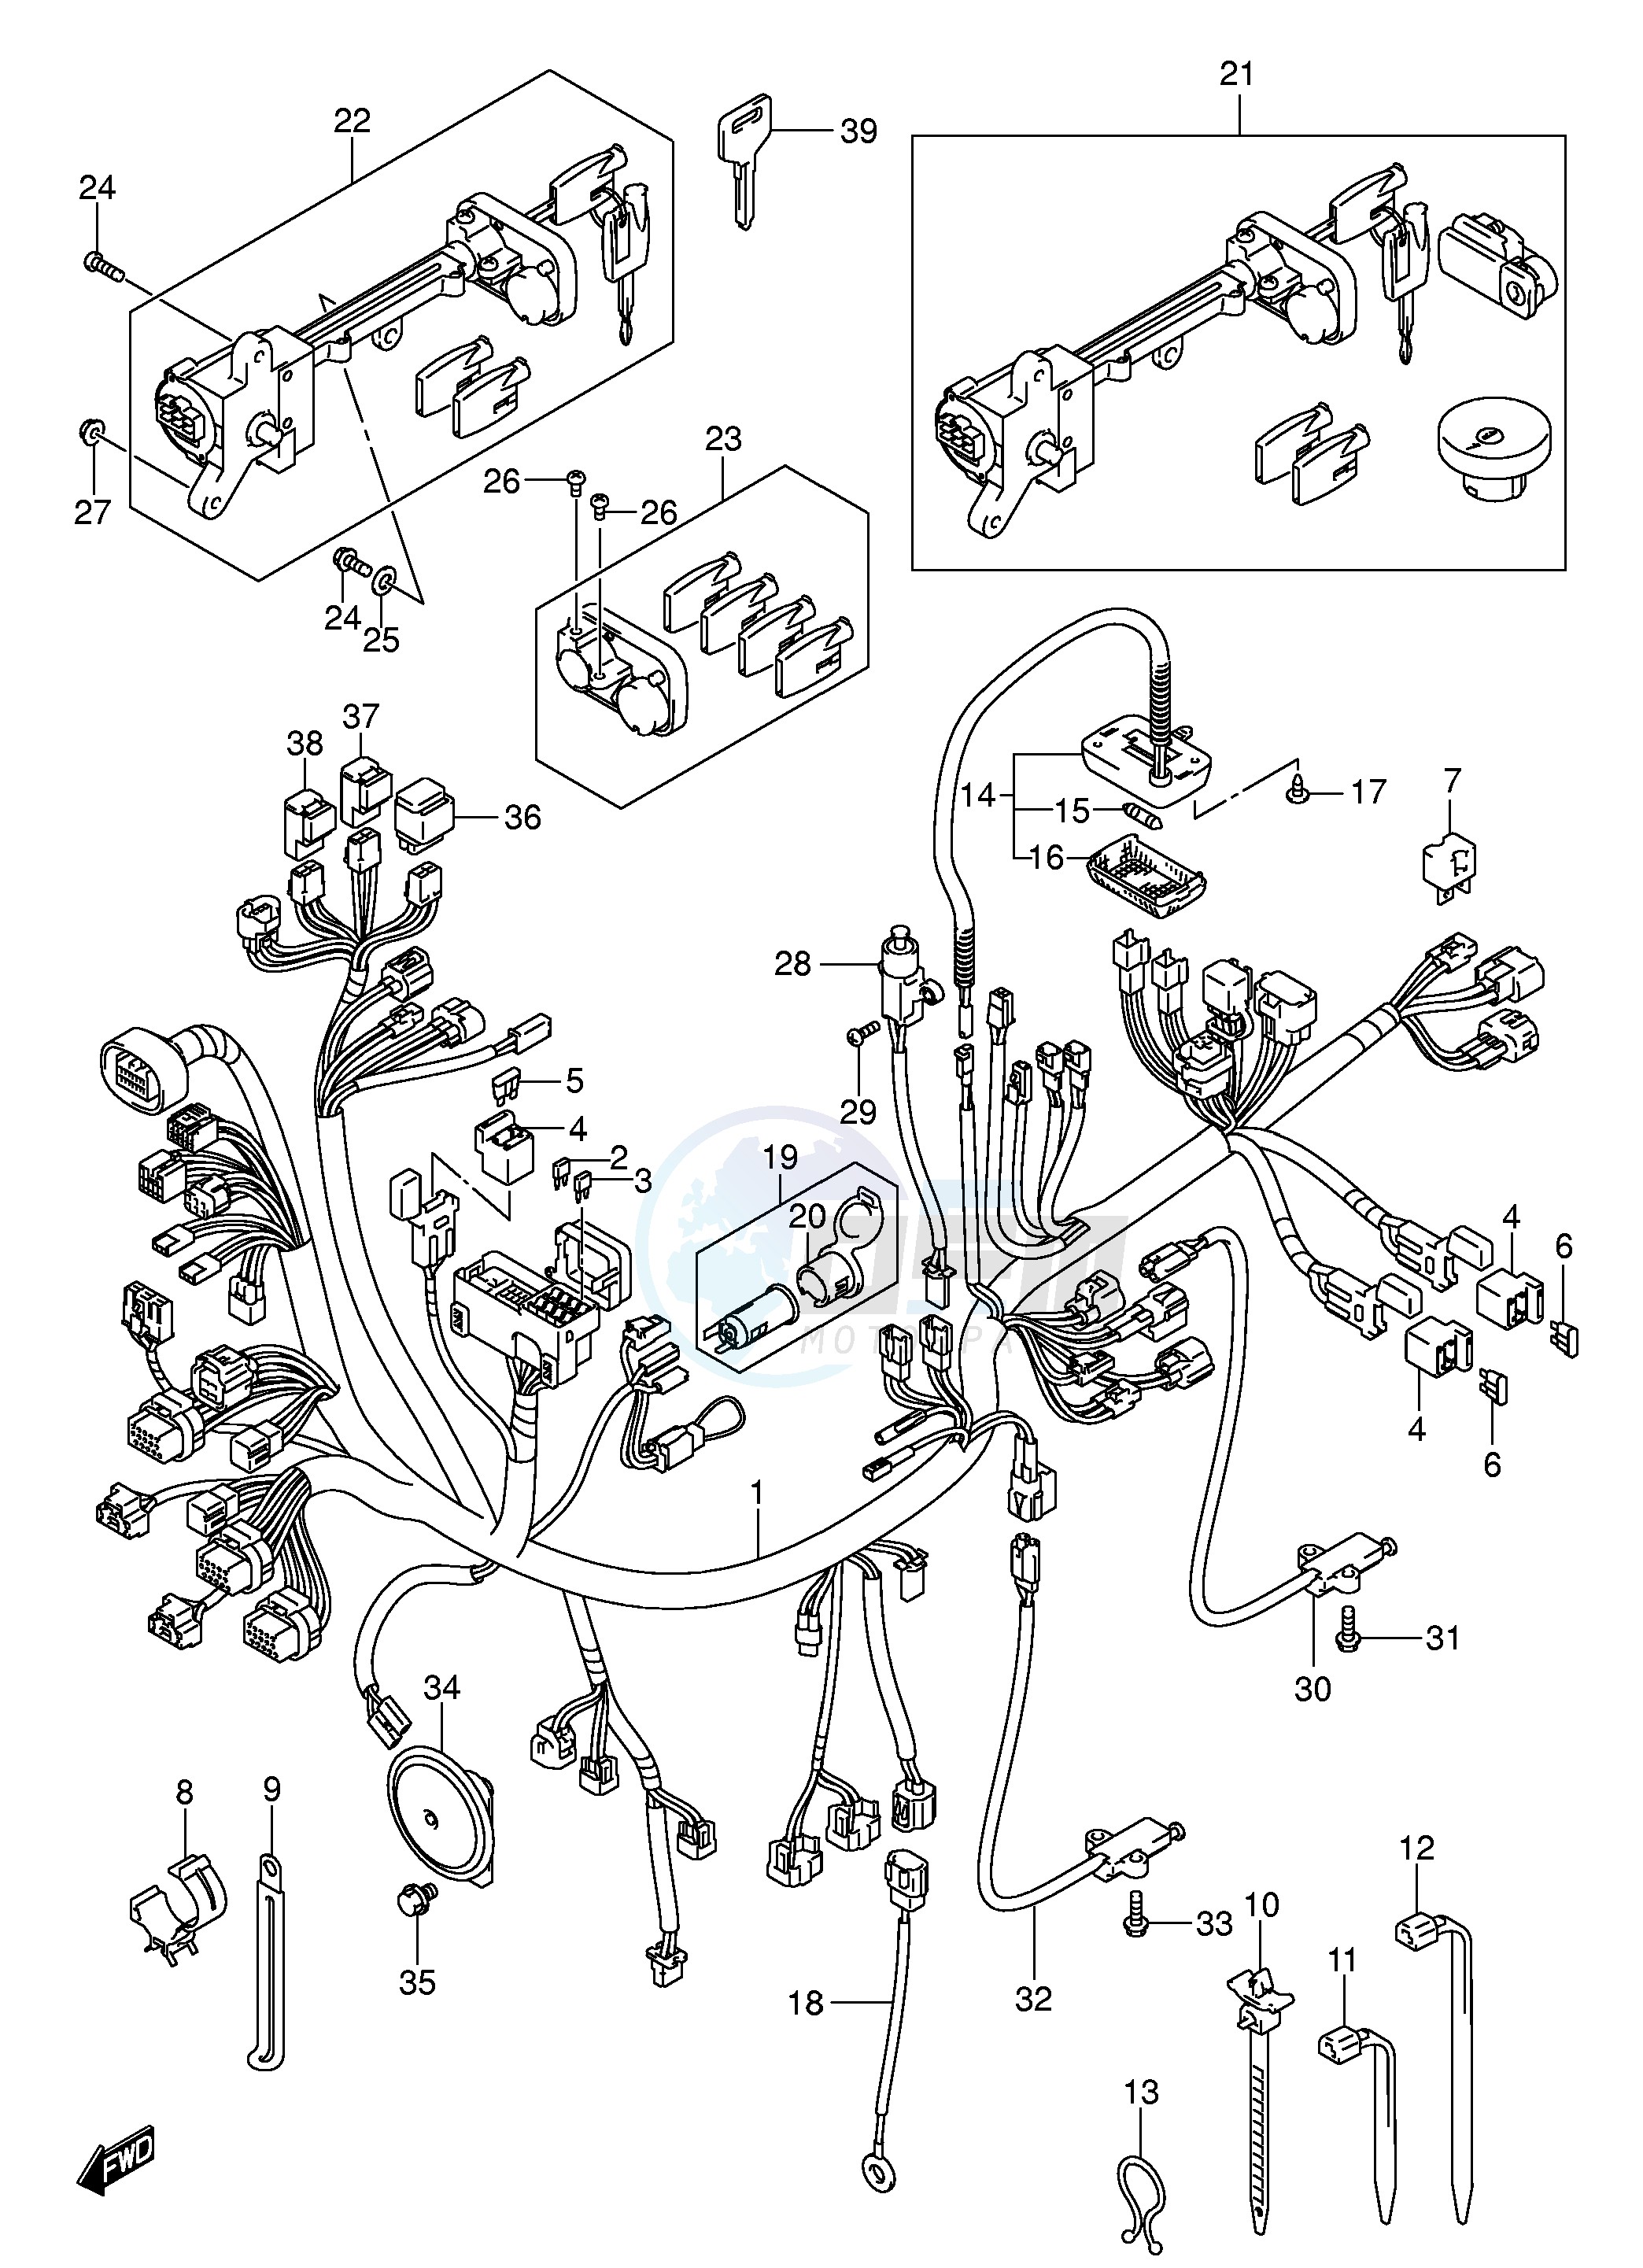 WIRING HARNESS (AN650K4) image